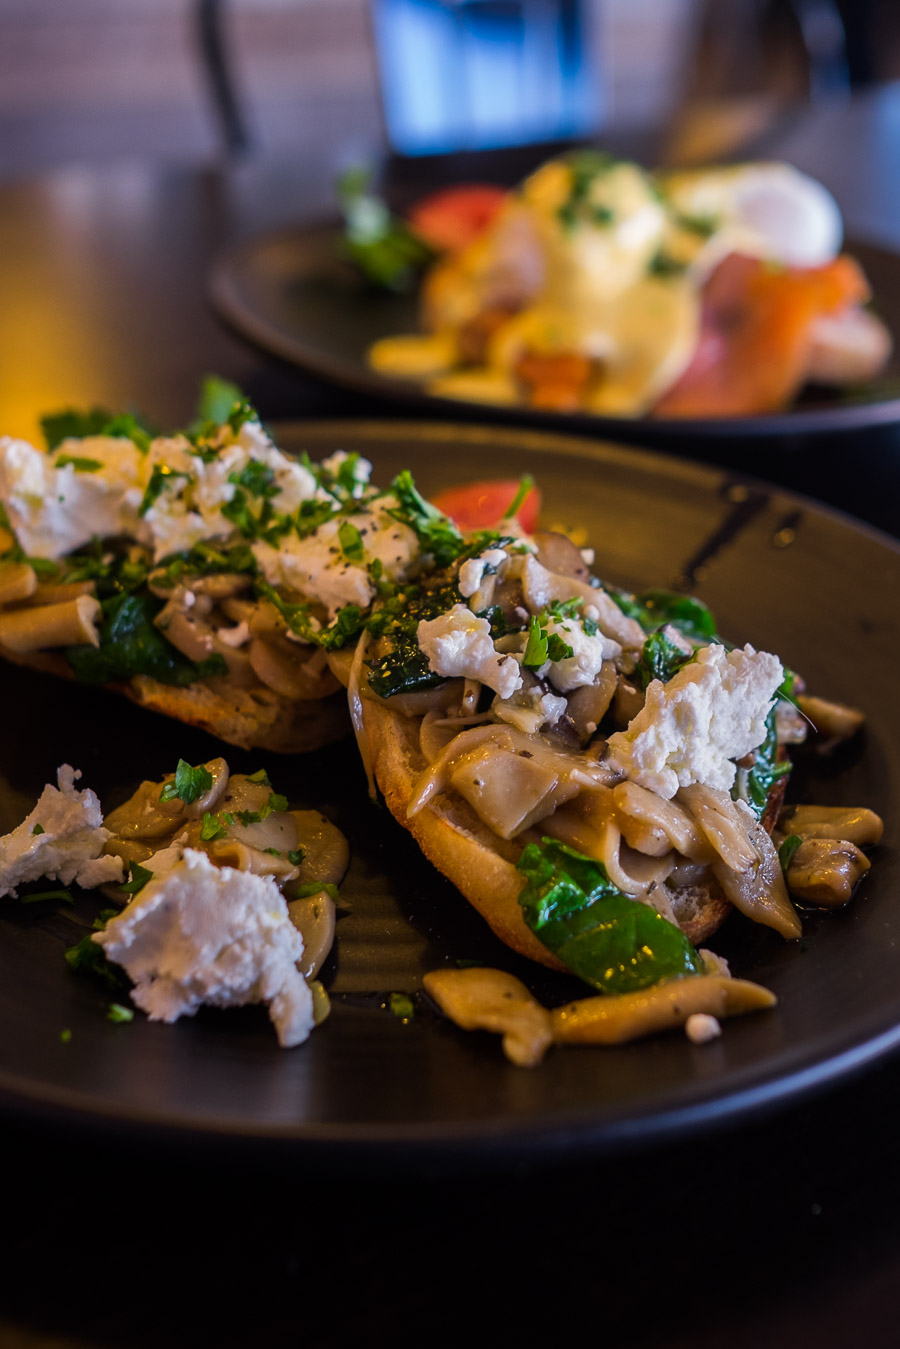 Wild mushroom bruschetta (AU$17.50) - sauteed mushrooms, wilted spinach, Meredith  Chevre goat's cheese, drizzled in Great Southern truffle oil.